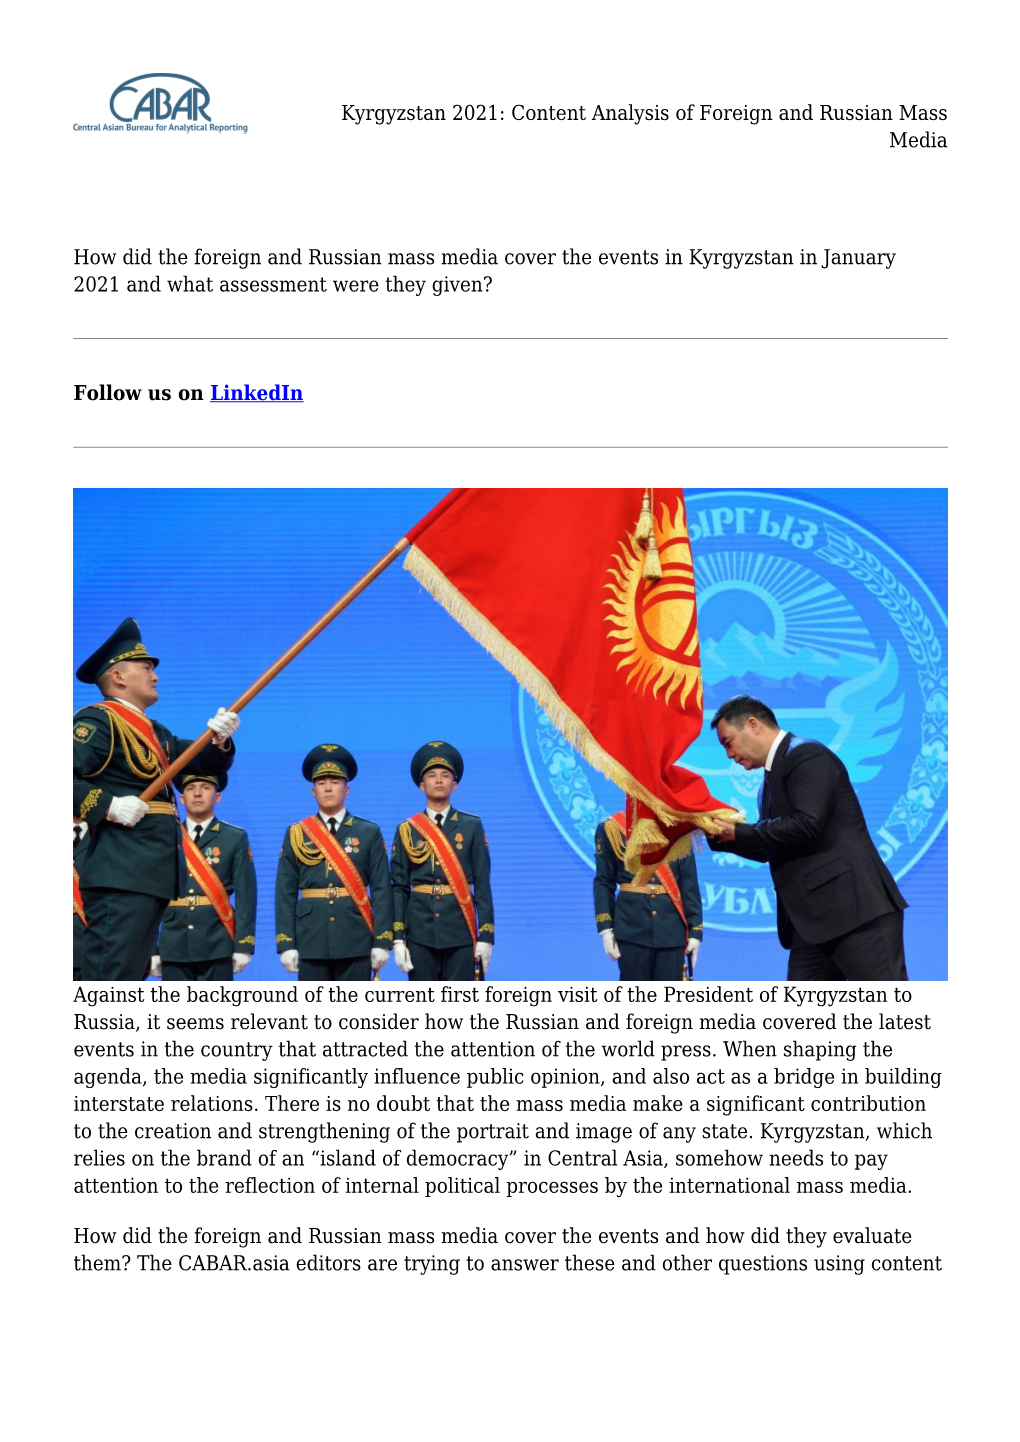 Kyrgyzstan 2021: Content Analysis of Foreign and Russian Mass Media